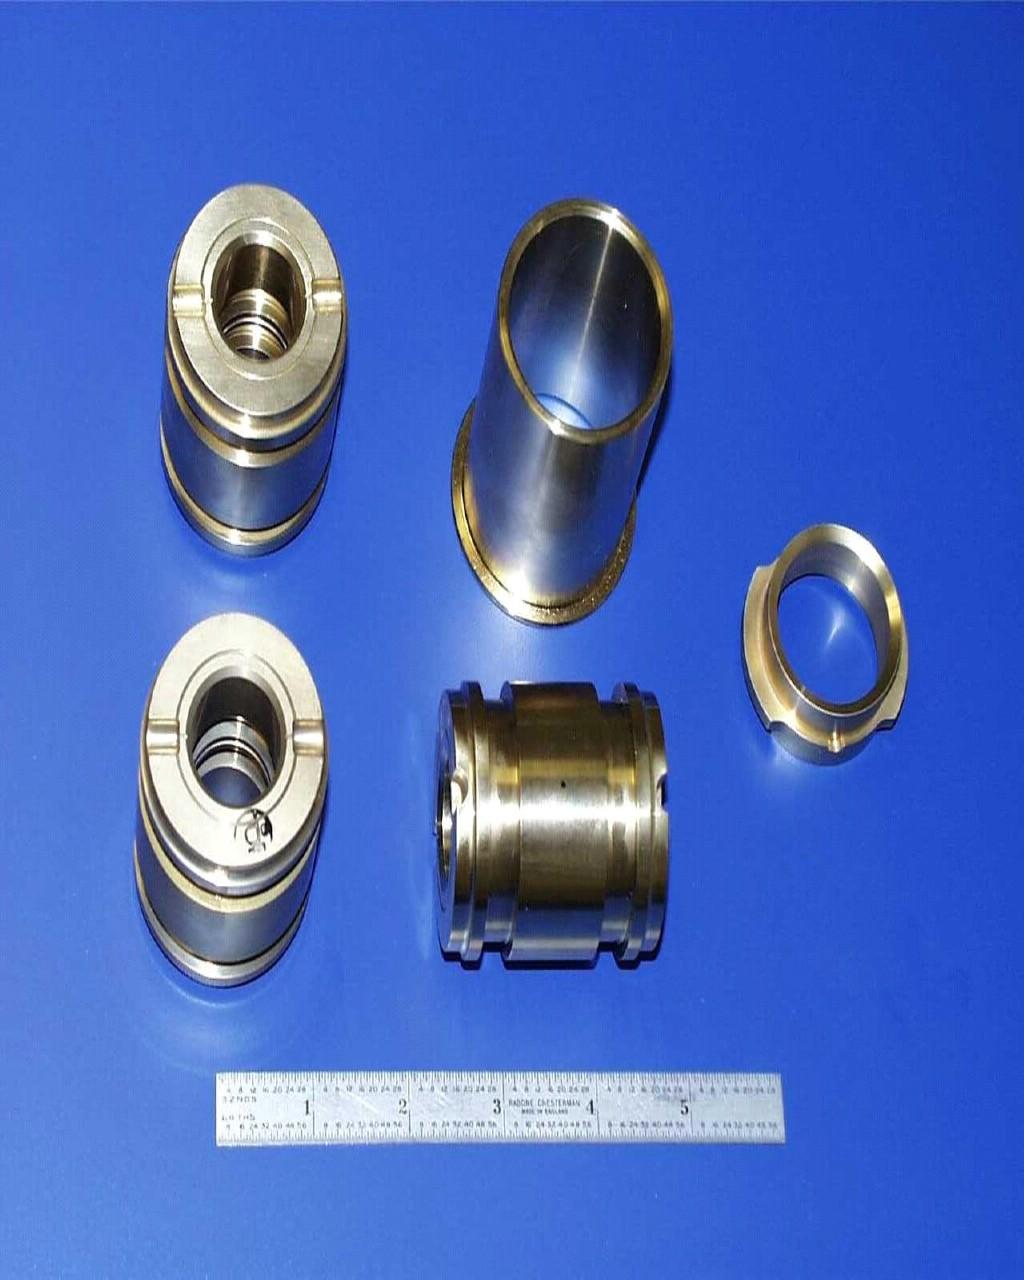 We are pleased to inform you that at present we will be machining your parts at usha Engineering, thereafter your complete machining work will be carried at Sialon s machine shop itself.